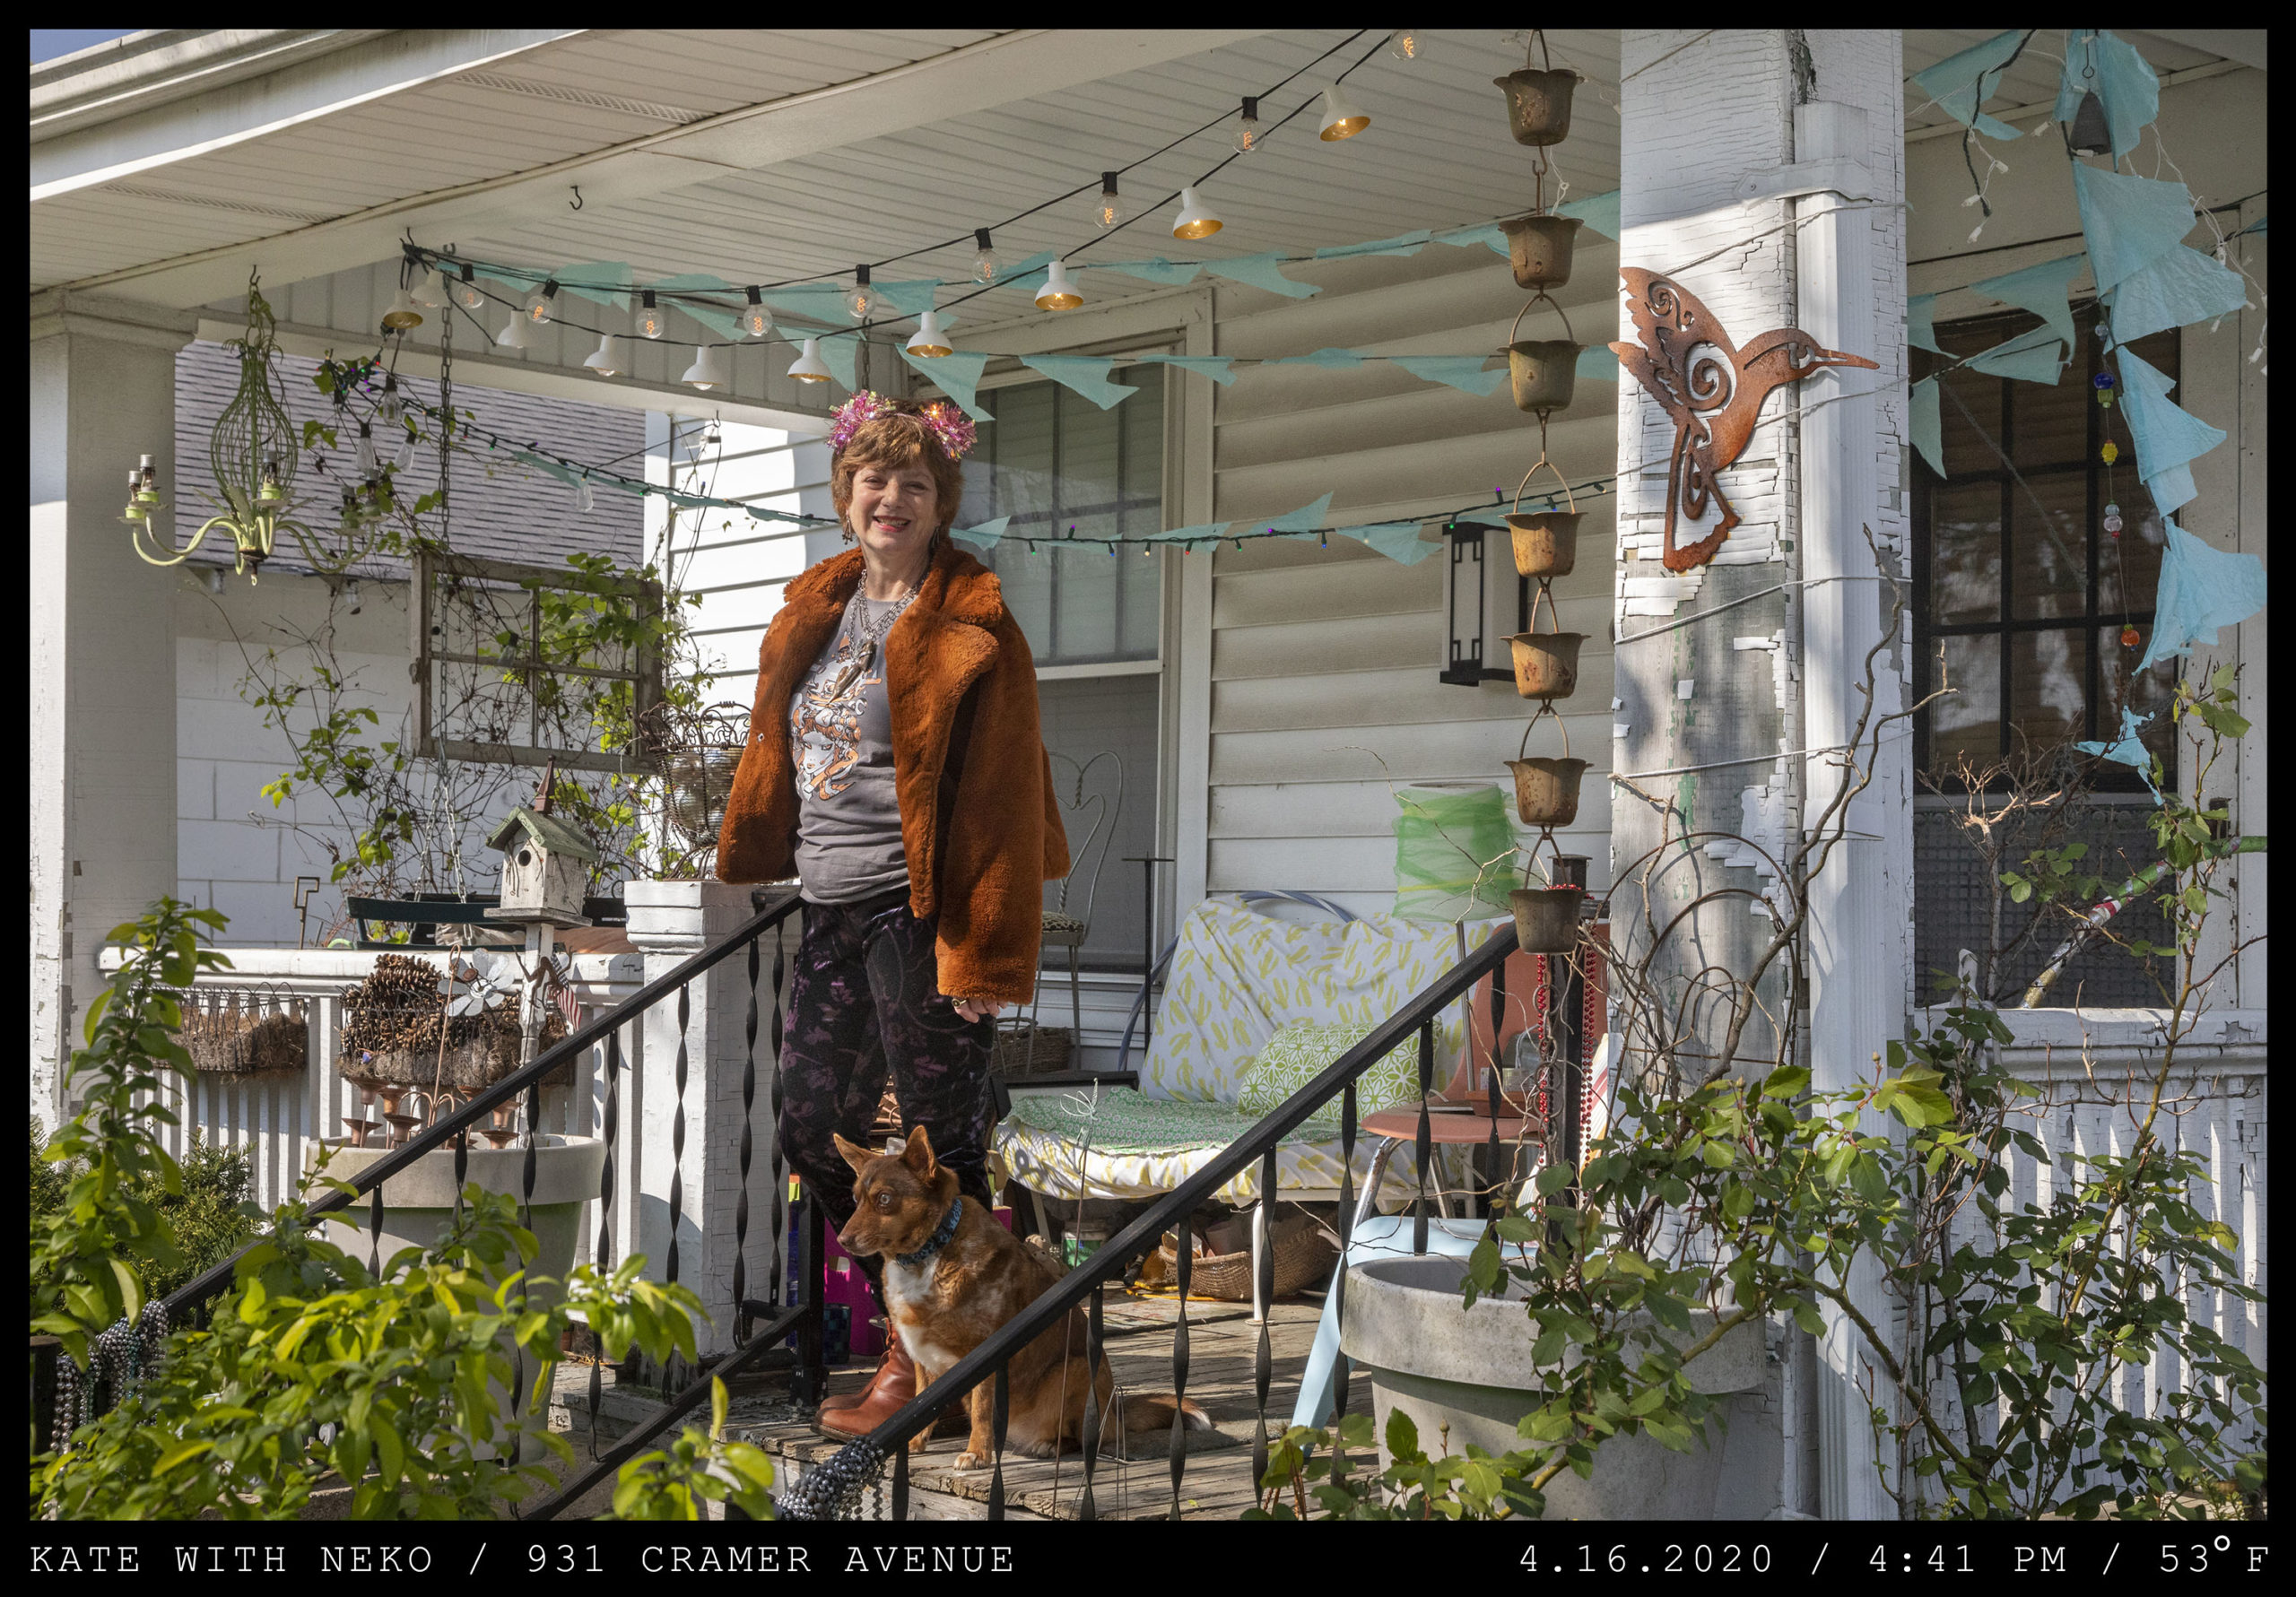 A woman wearing a red and white bow stands on a front porch with patio decorations, plants and chimes. She is wearing a thick, furry rust-colored collared coat in pajama pants with a dog at her side looking down the stairs.